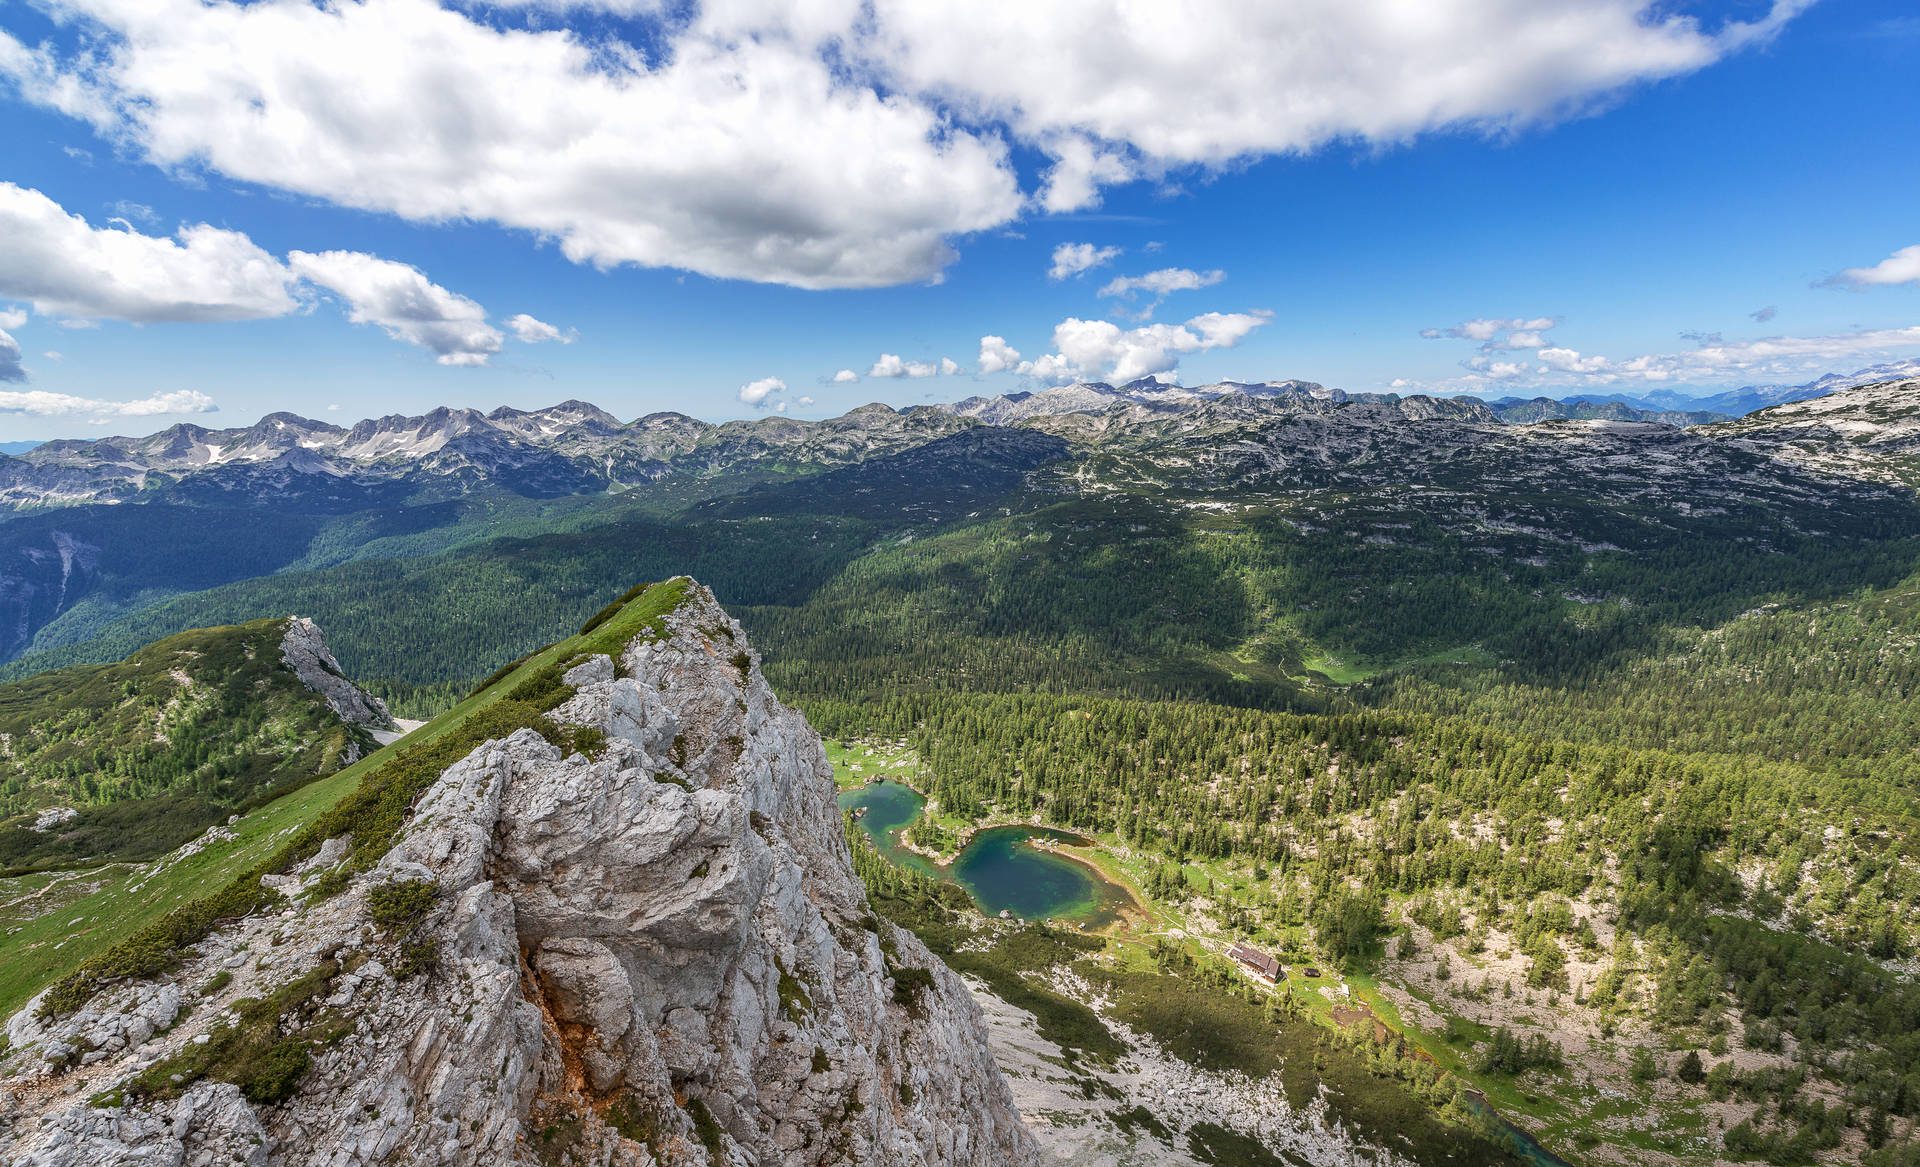 Mountainous_ Landscape_with_ Lakes_ Viewpoint.jpg Wallpaper